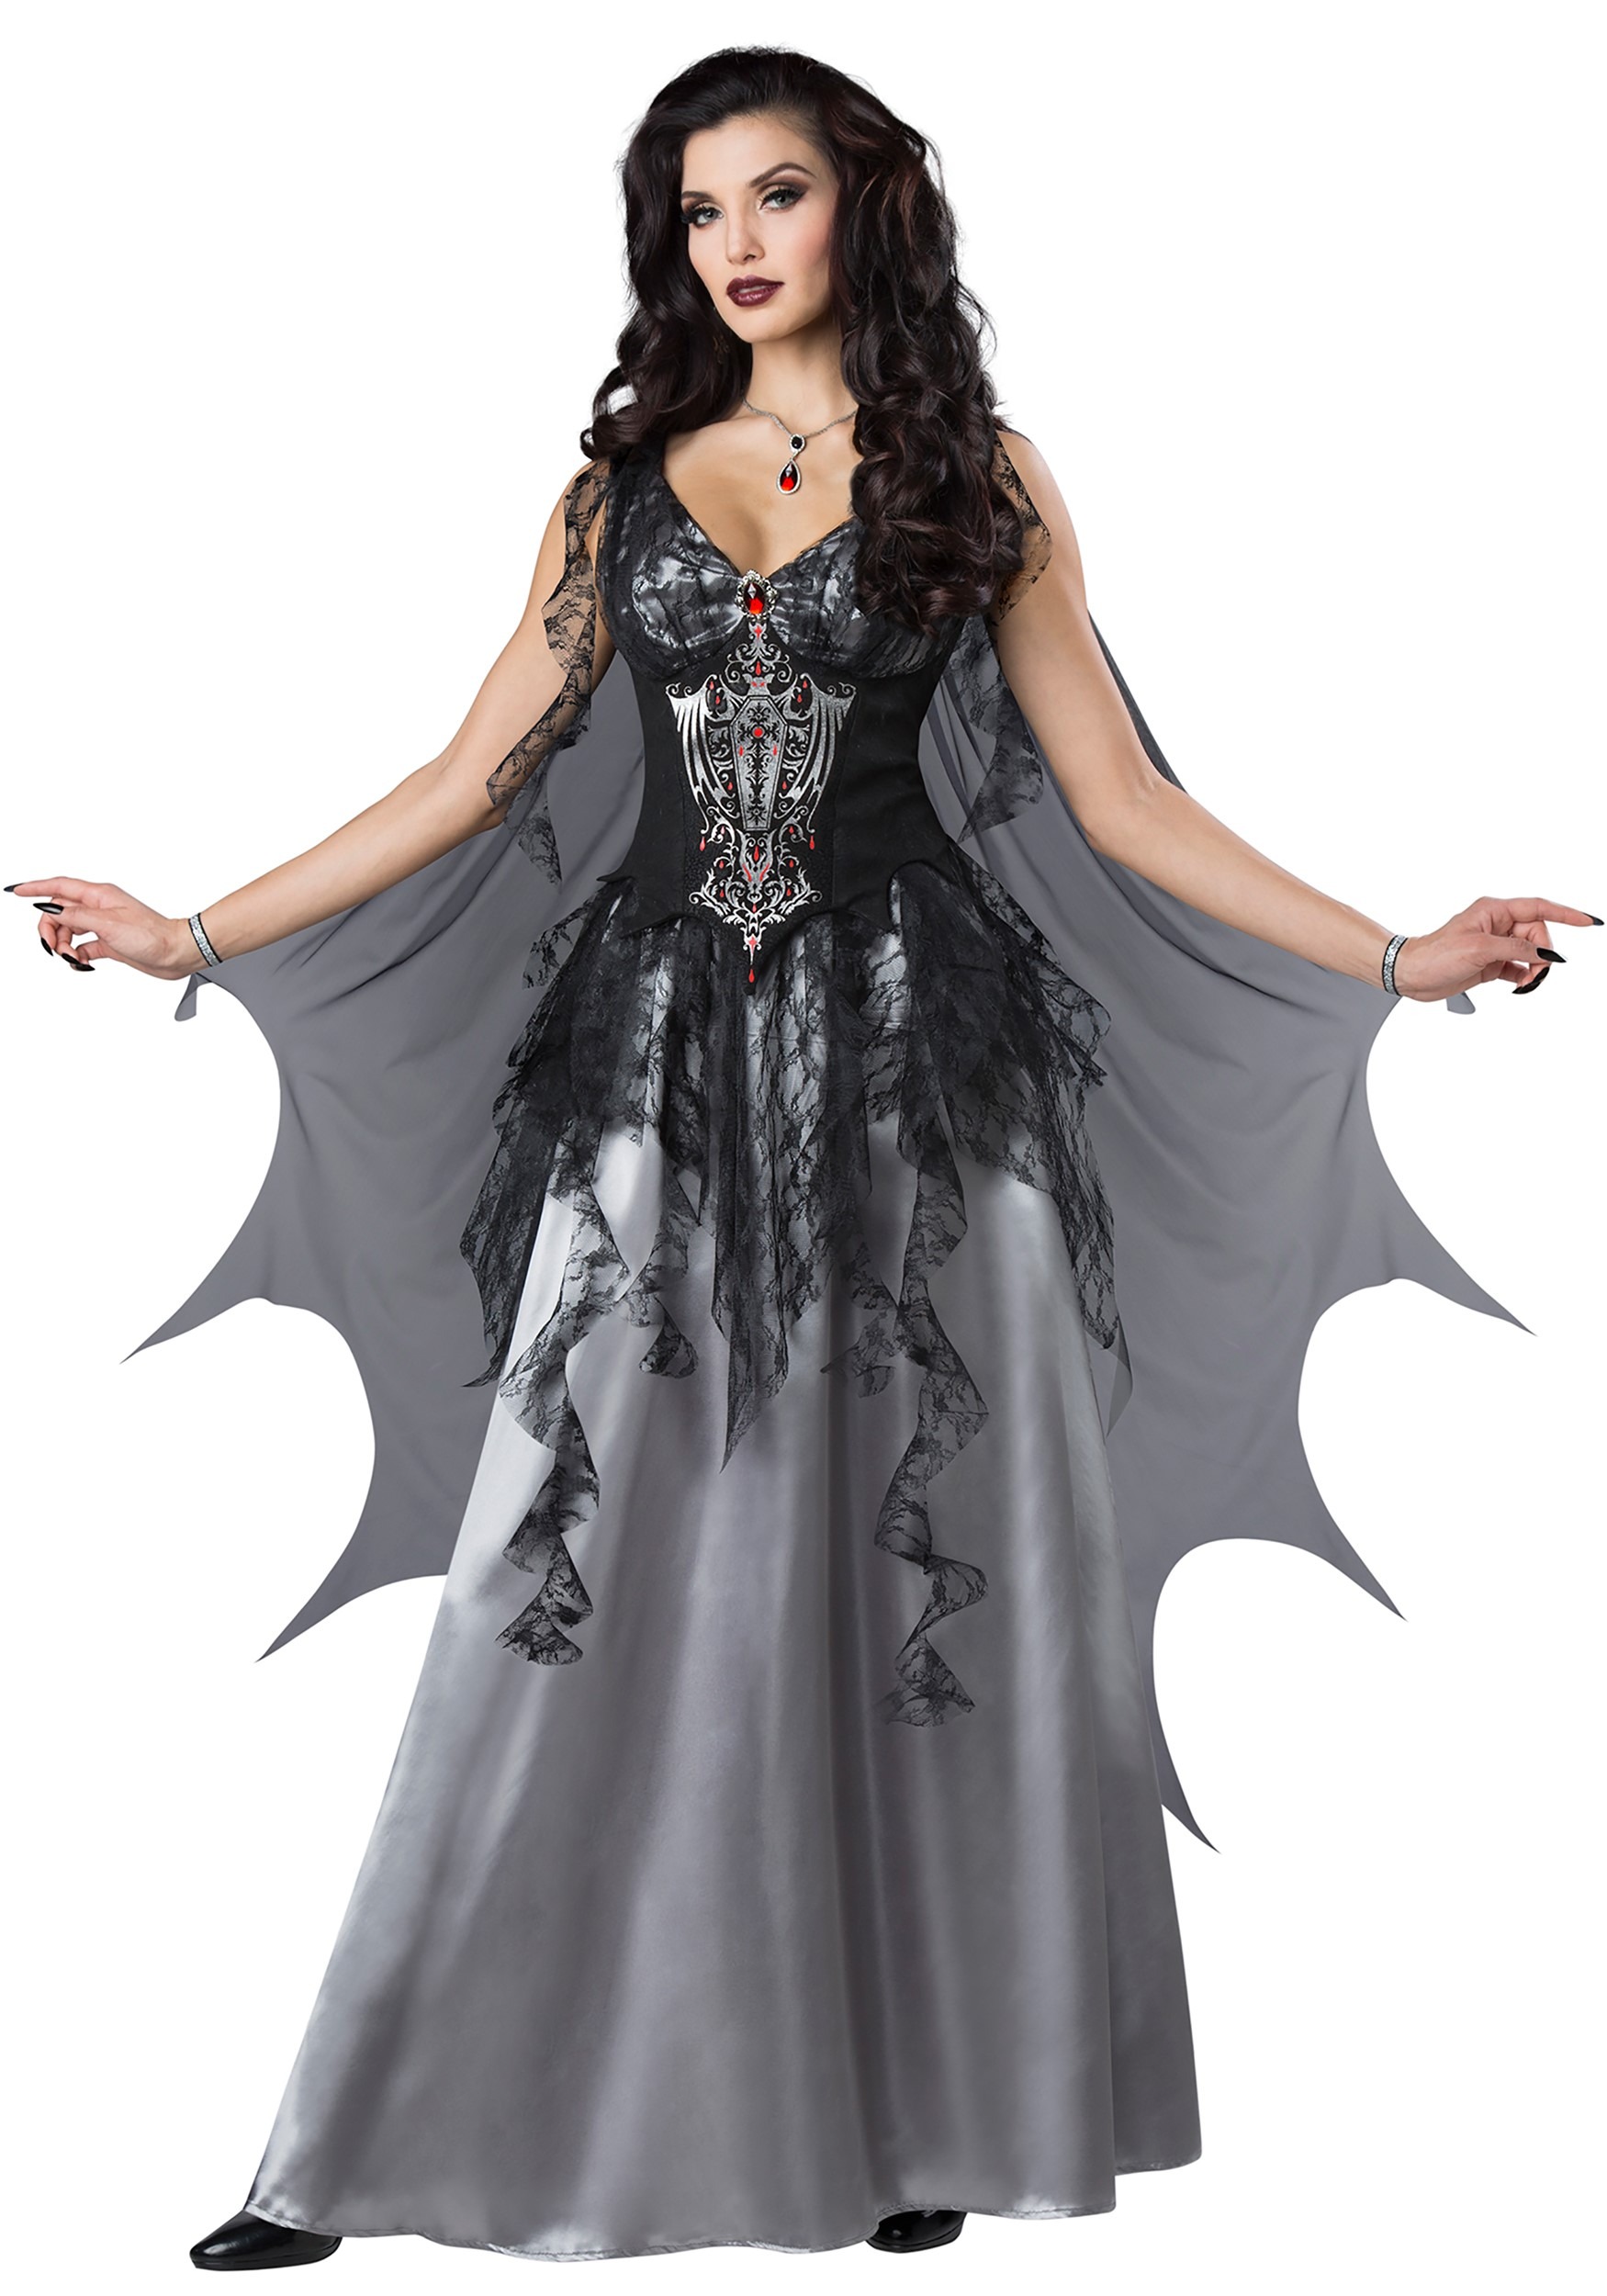 The Best Womens Vampire Costumes And Accessories Deluxe Theatrical